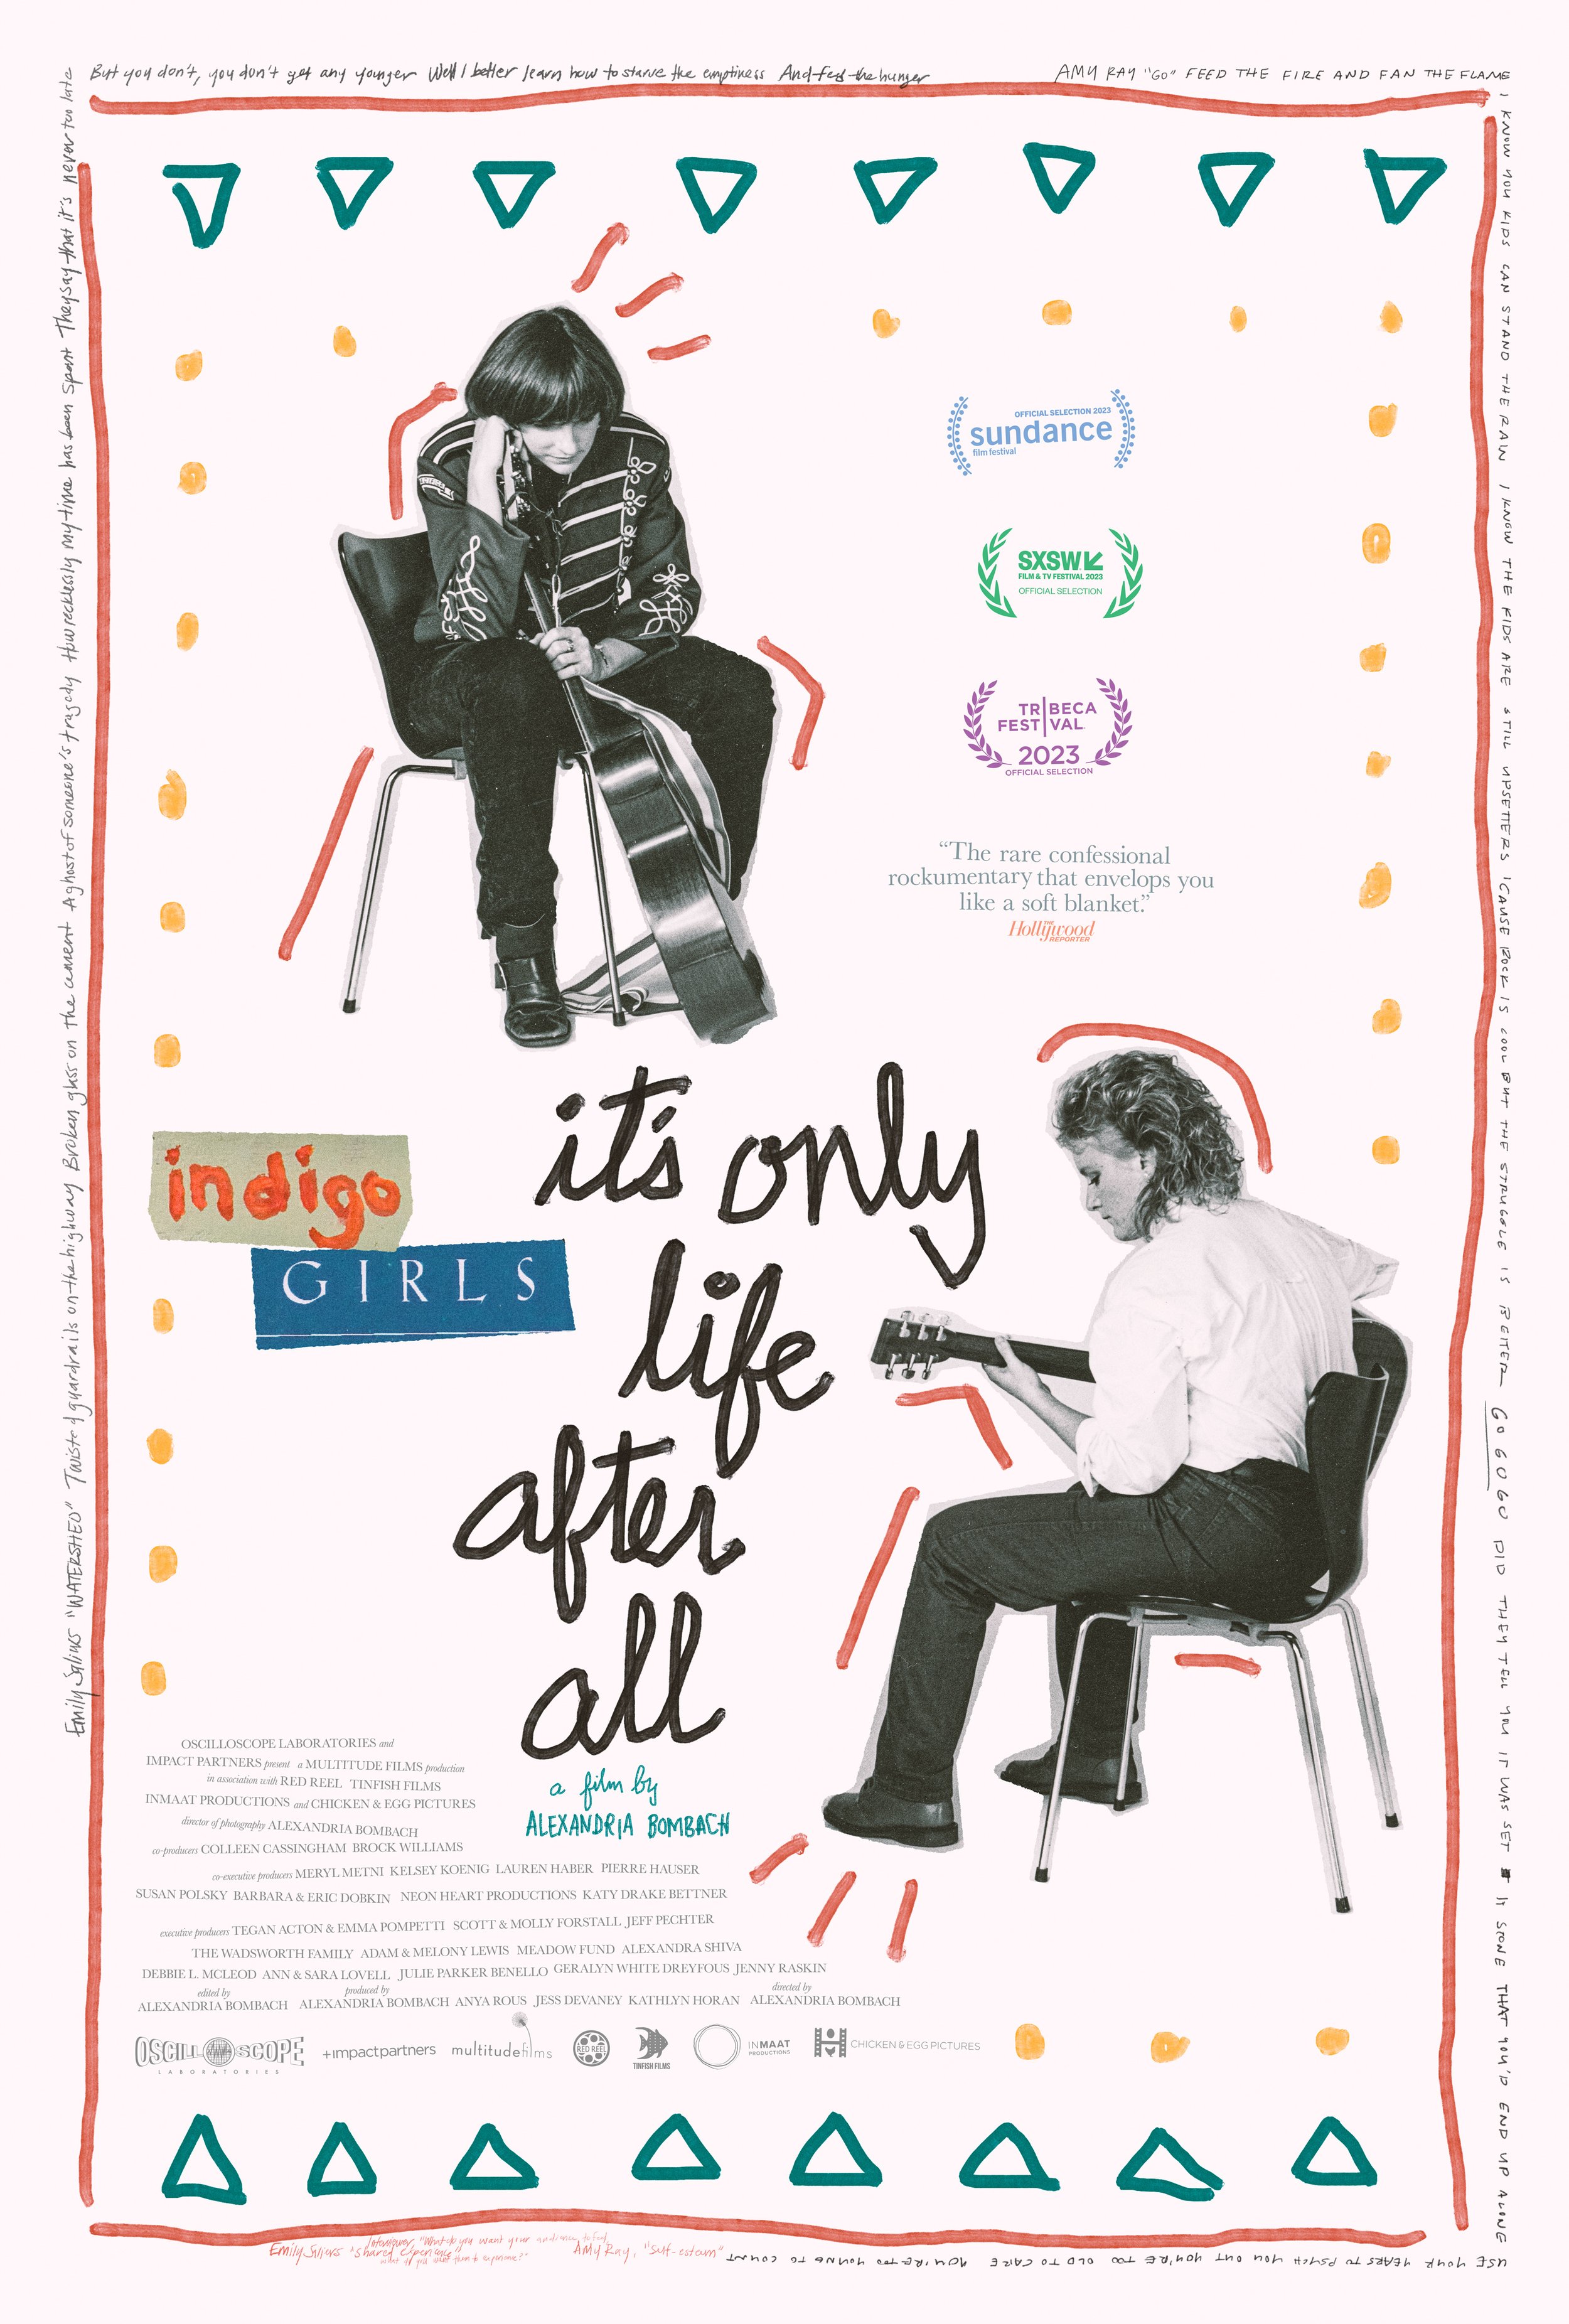 It's Only Life After All - The Indigo Girls